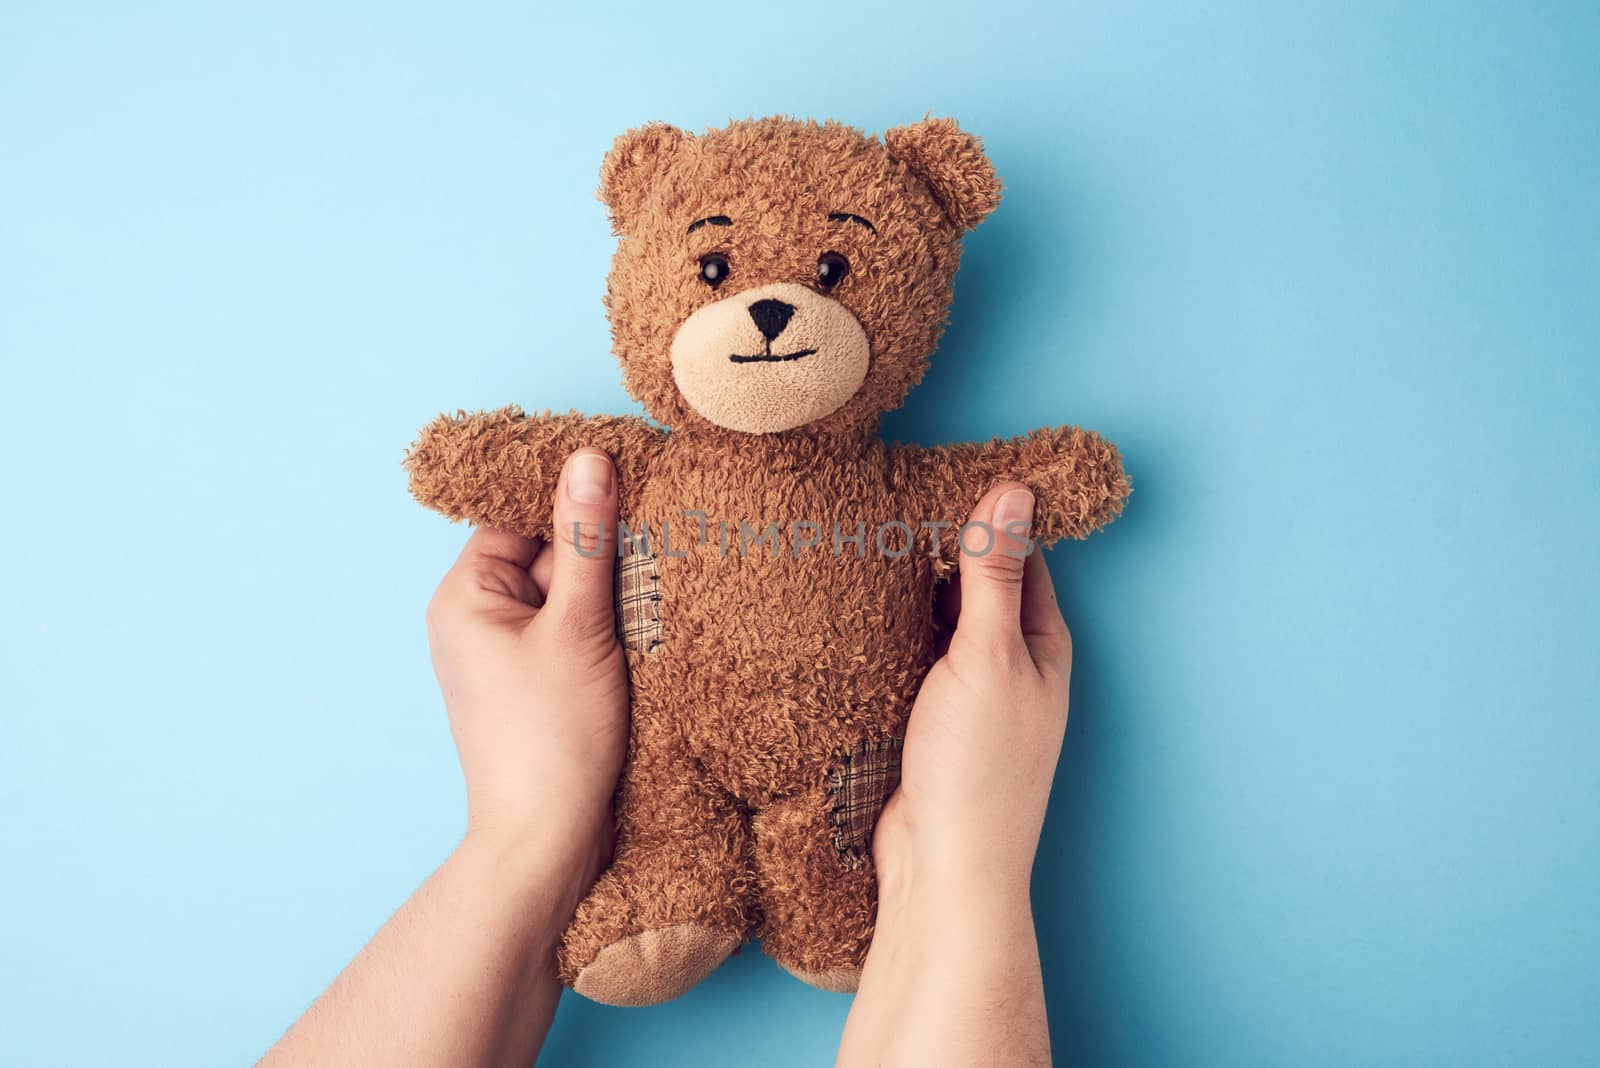 two female hands hold a small brown toy teddy bear on a blue background, top view